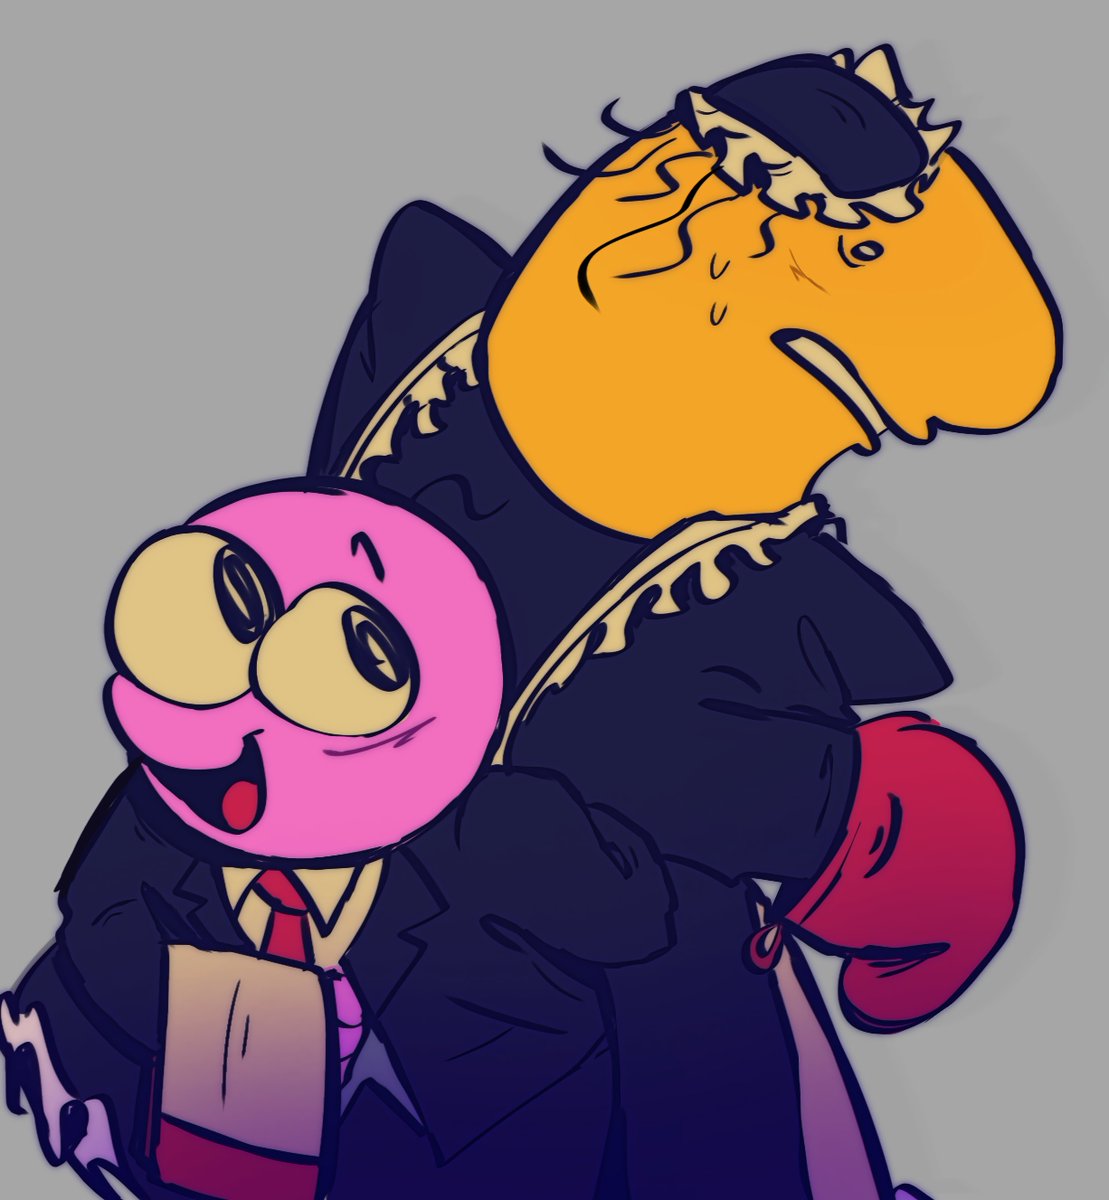 i just really wanted to draw butler pim